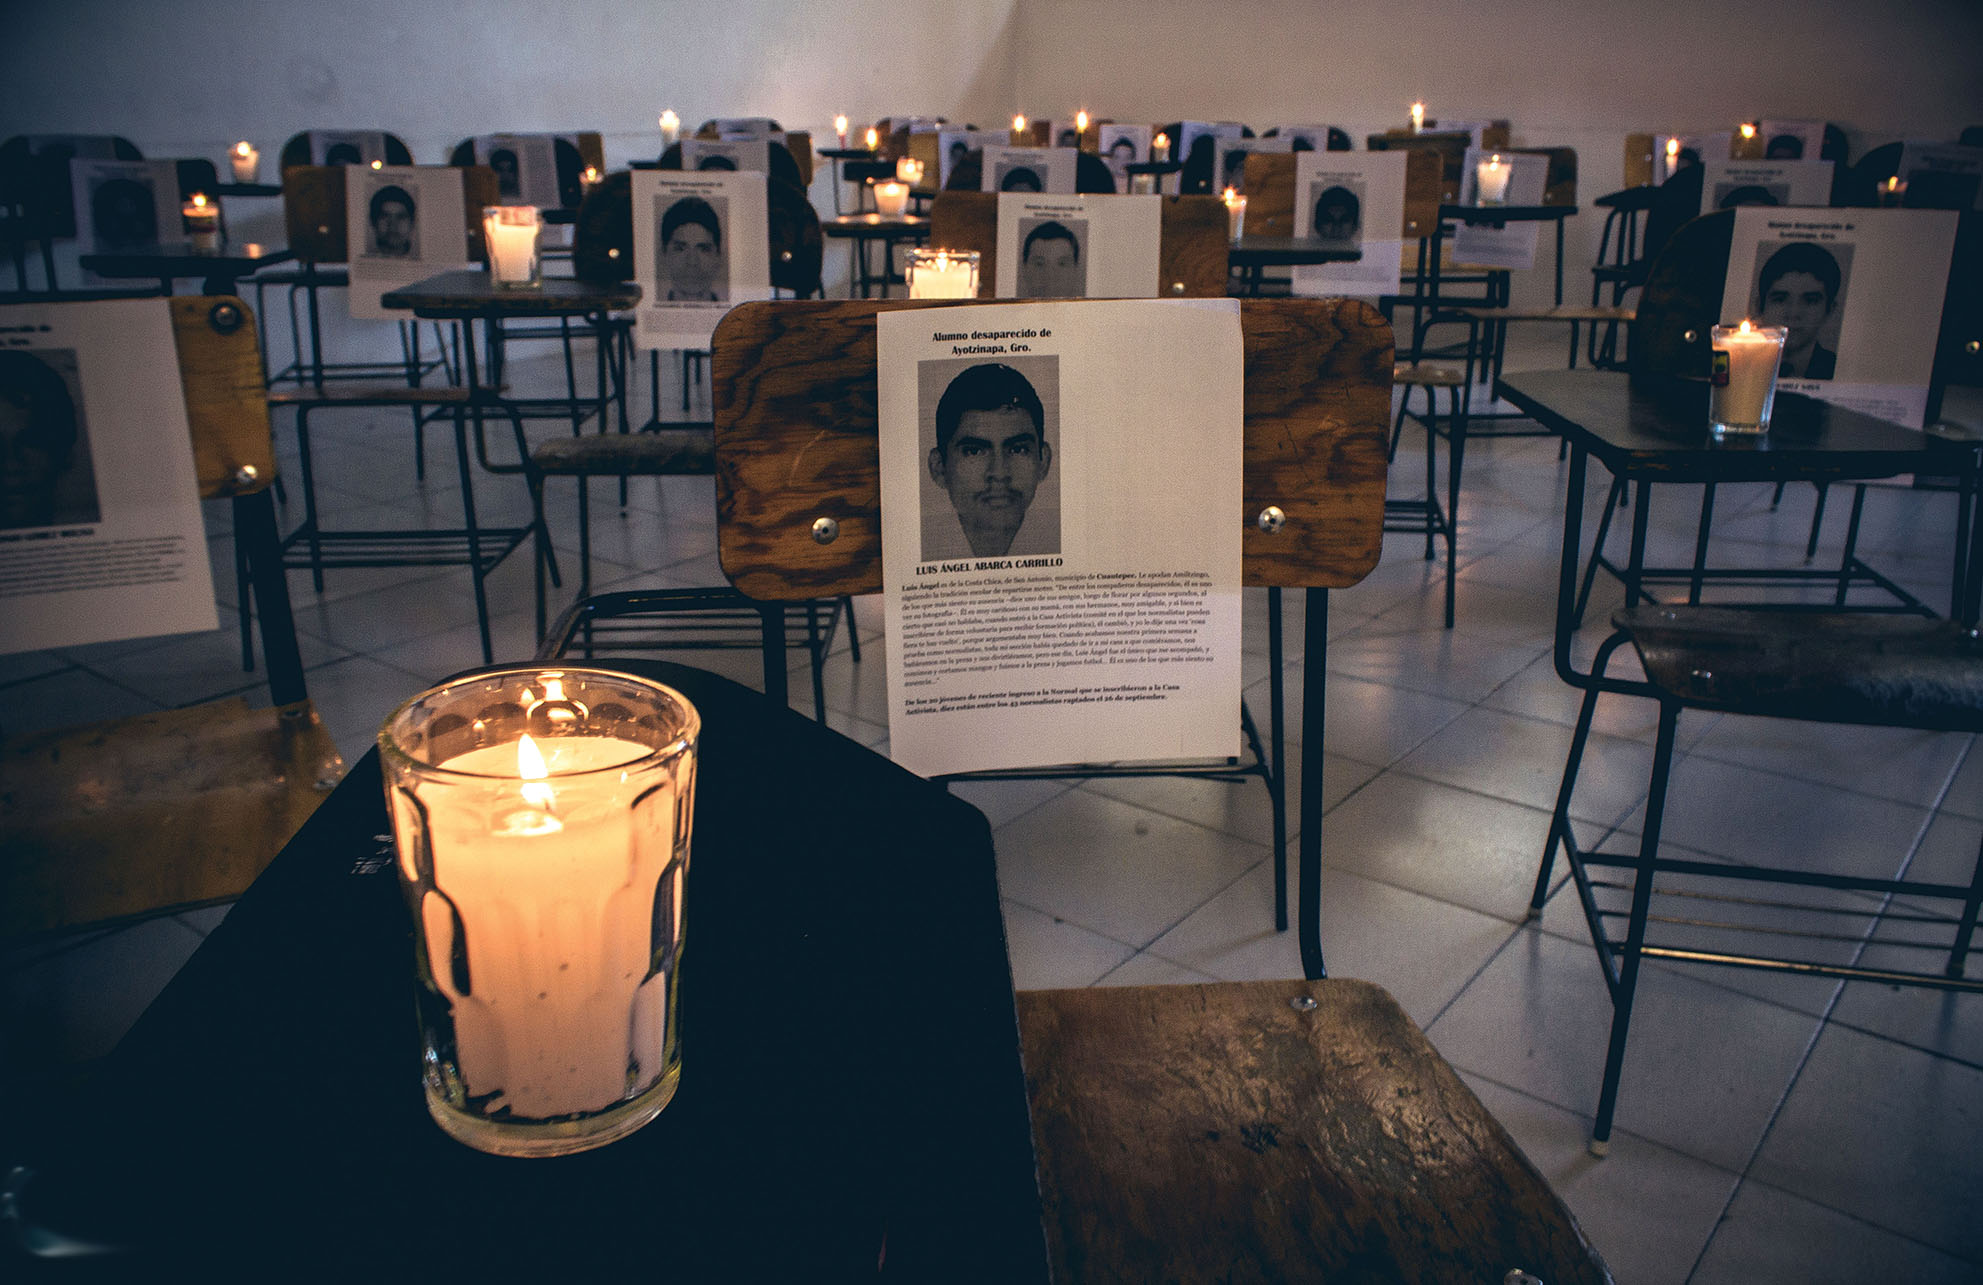 Candles sit on student desks in a memorial to the disappeared students in Ayotzinapa, 2015. (Photo by Uriel López.)